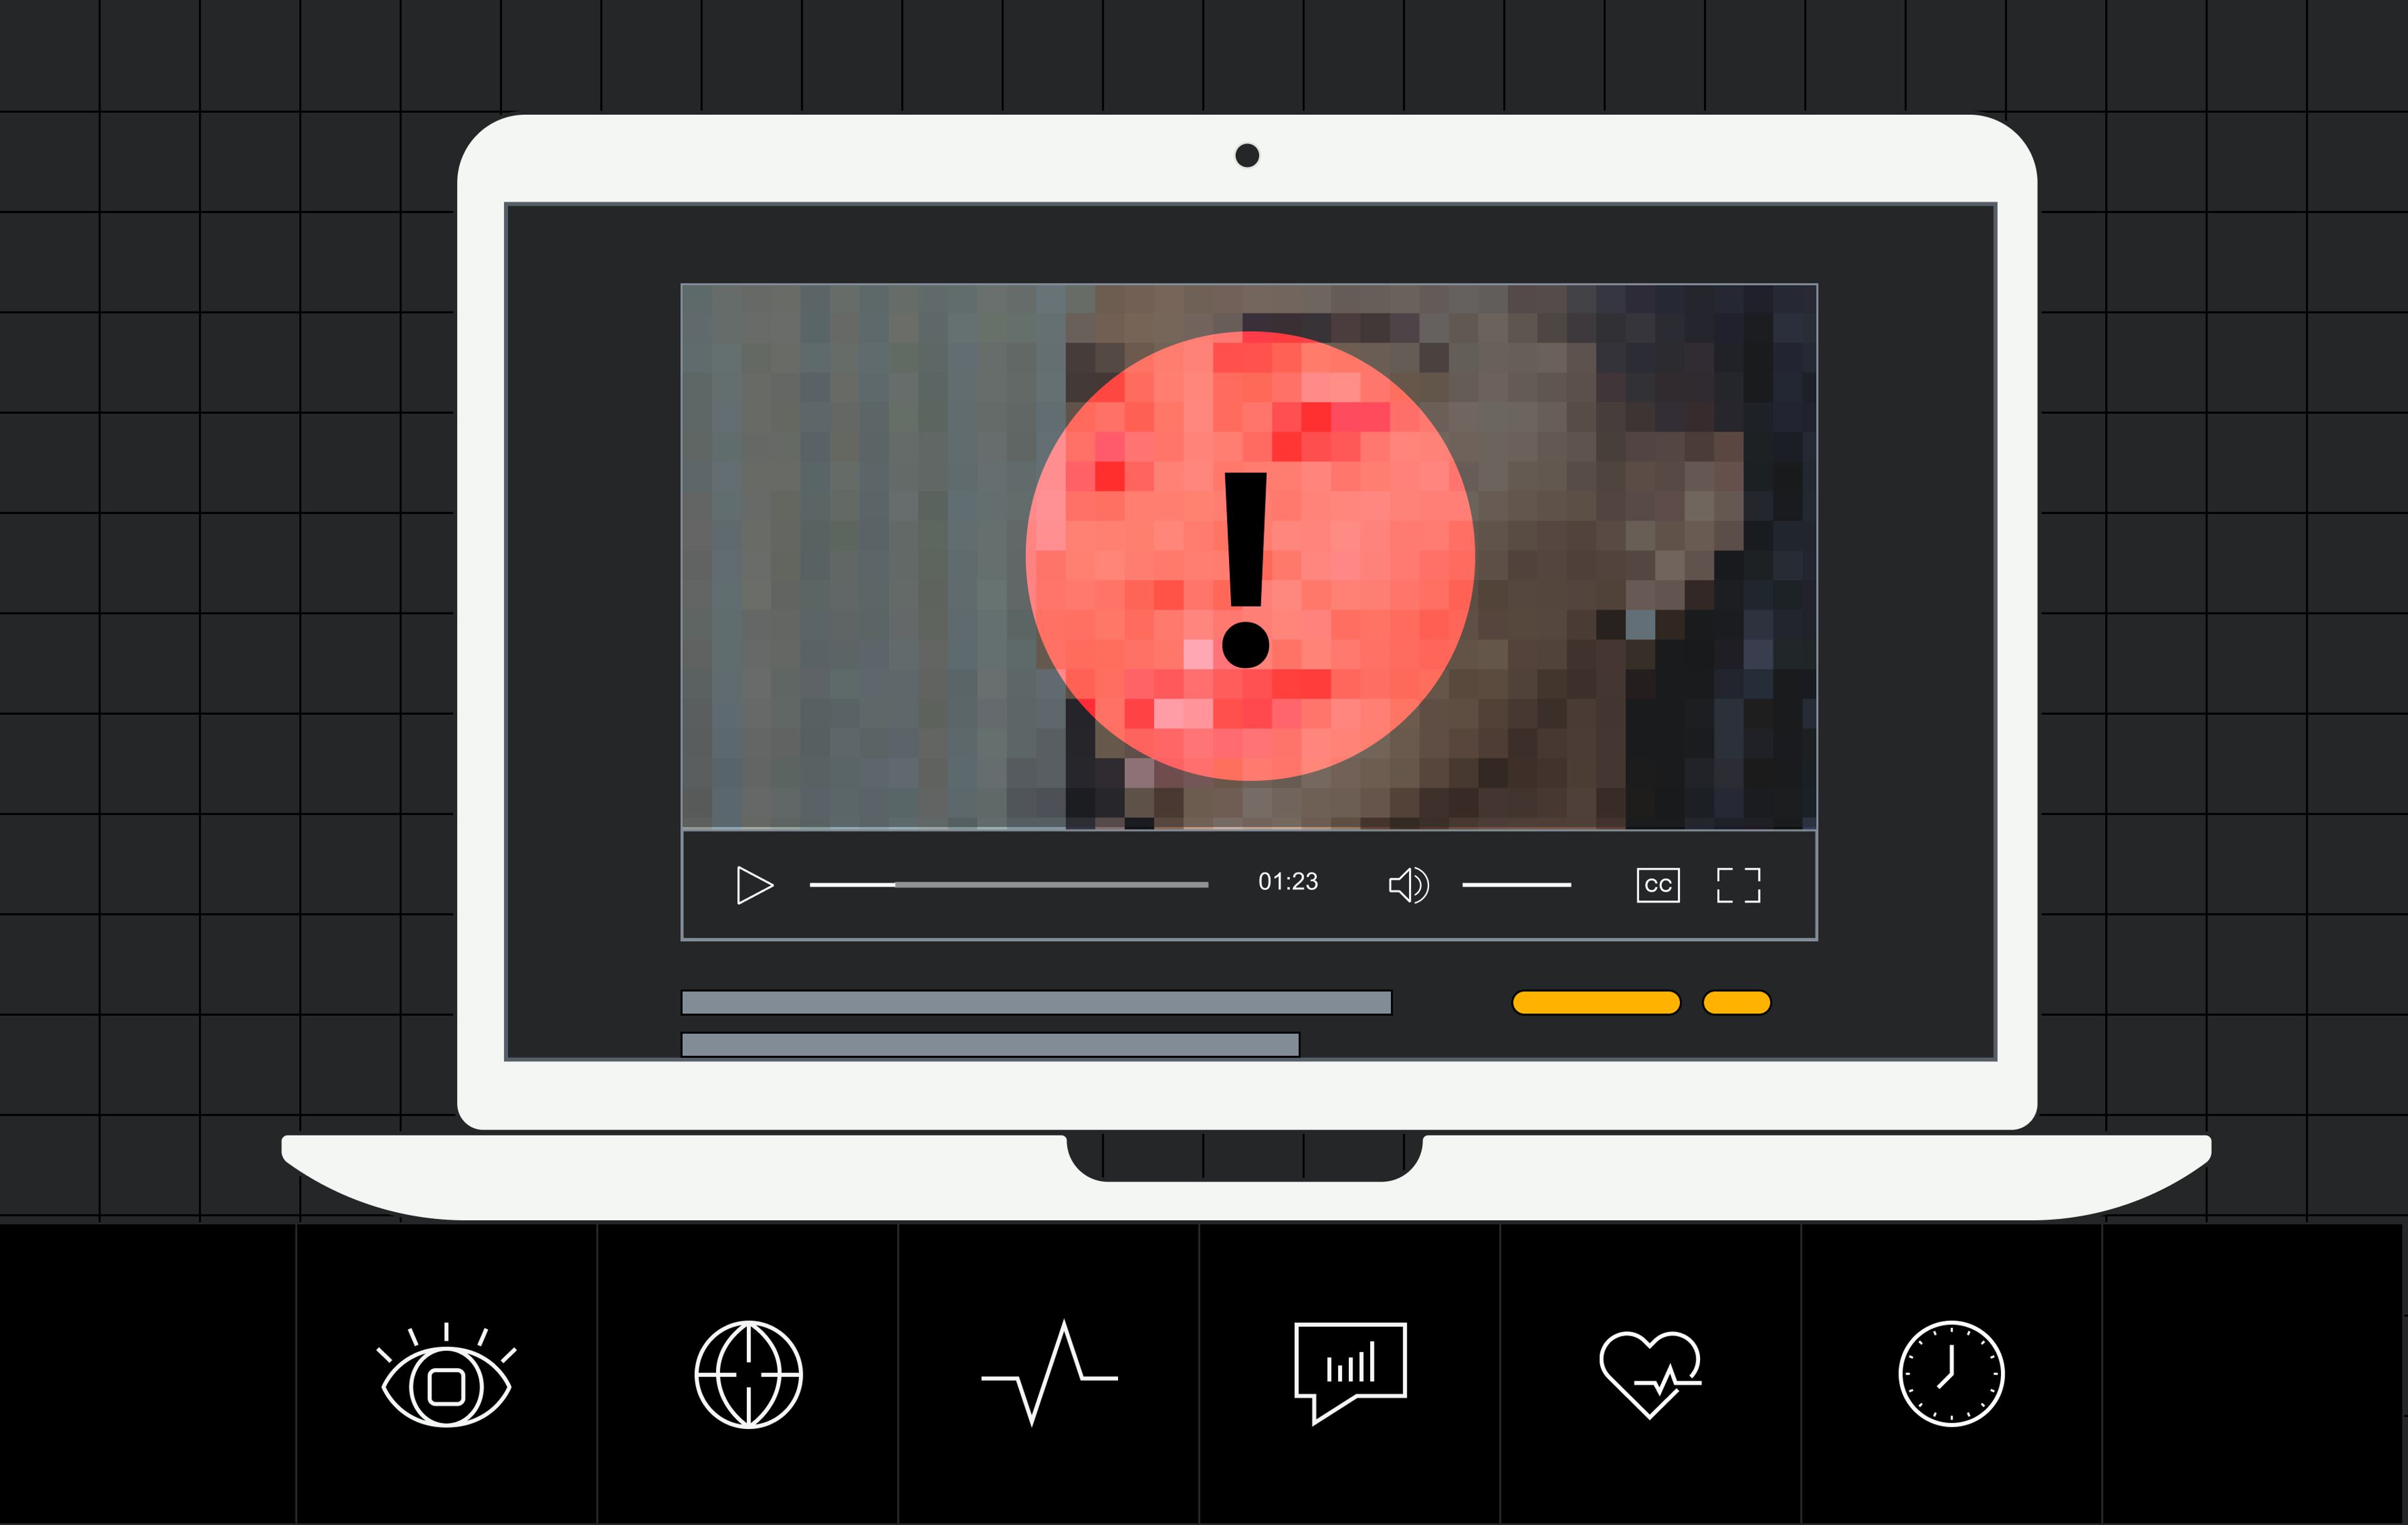 A laptop showing a video player with a degraded video playing. A red error icon is overlaid on top of the video.